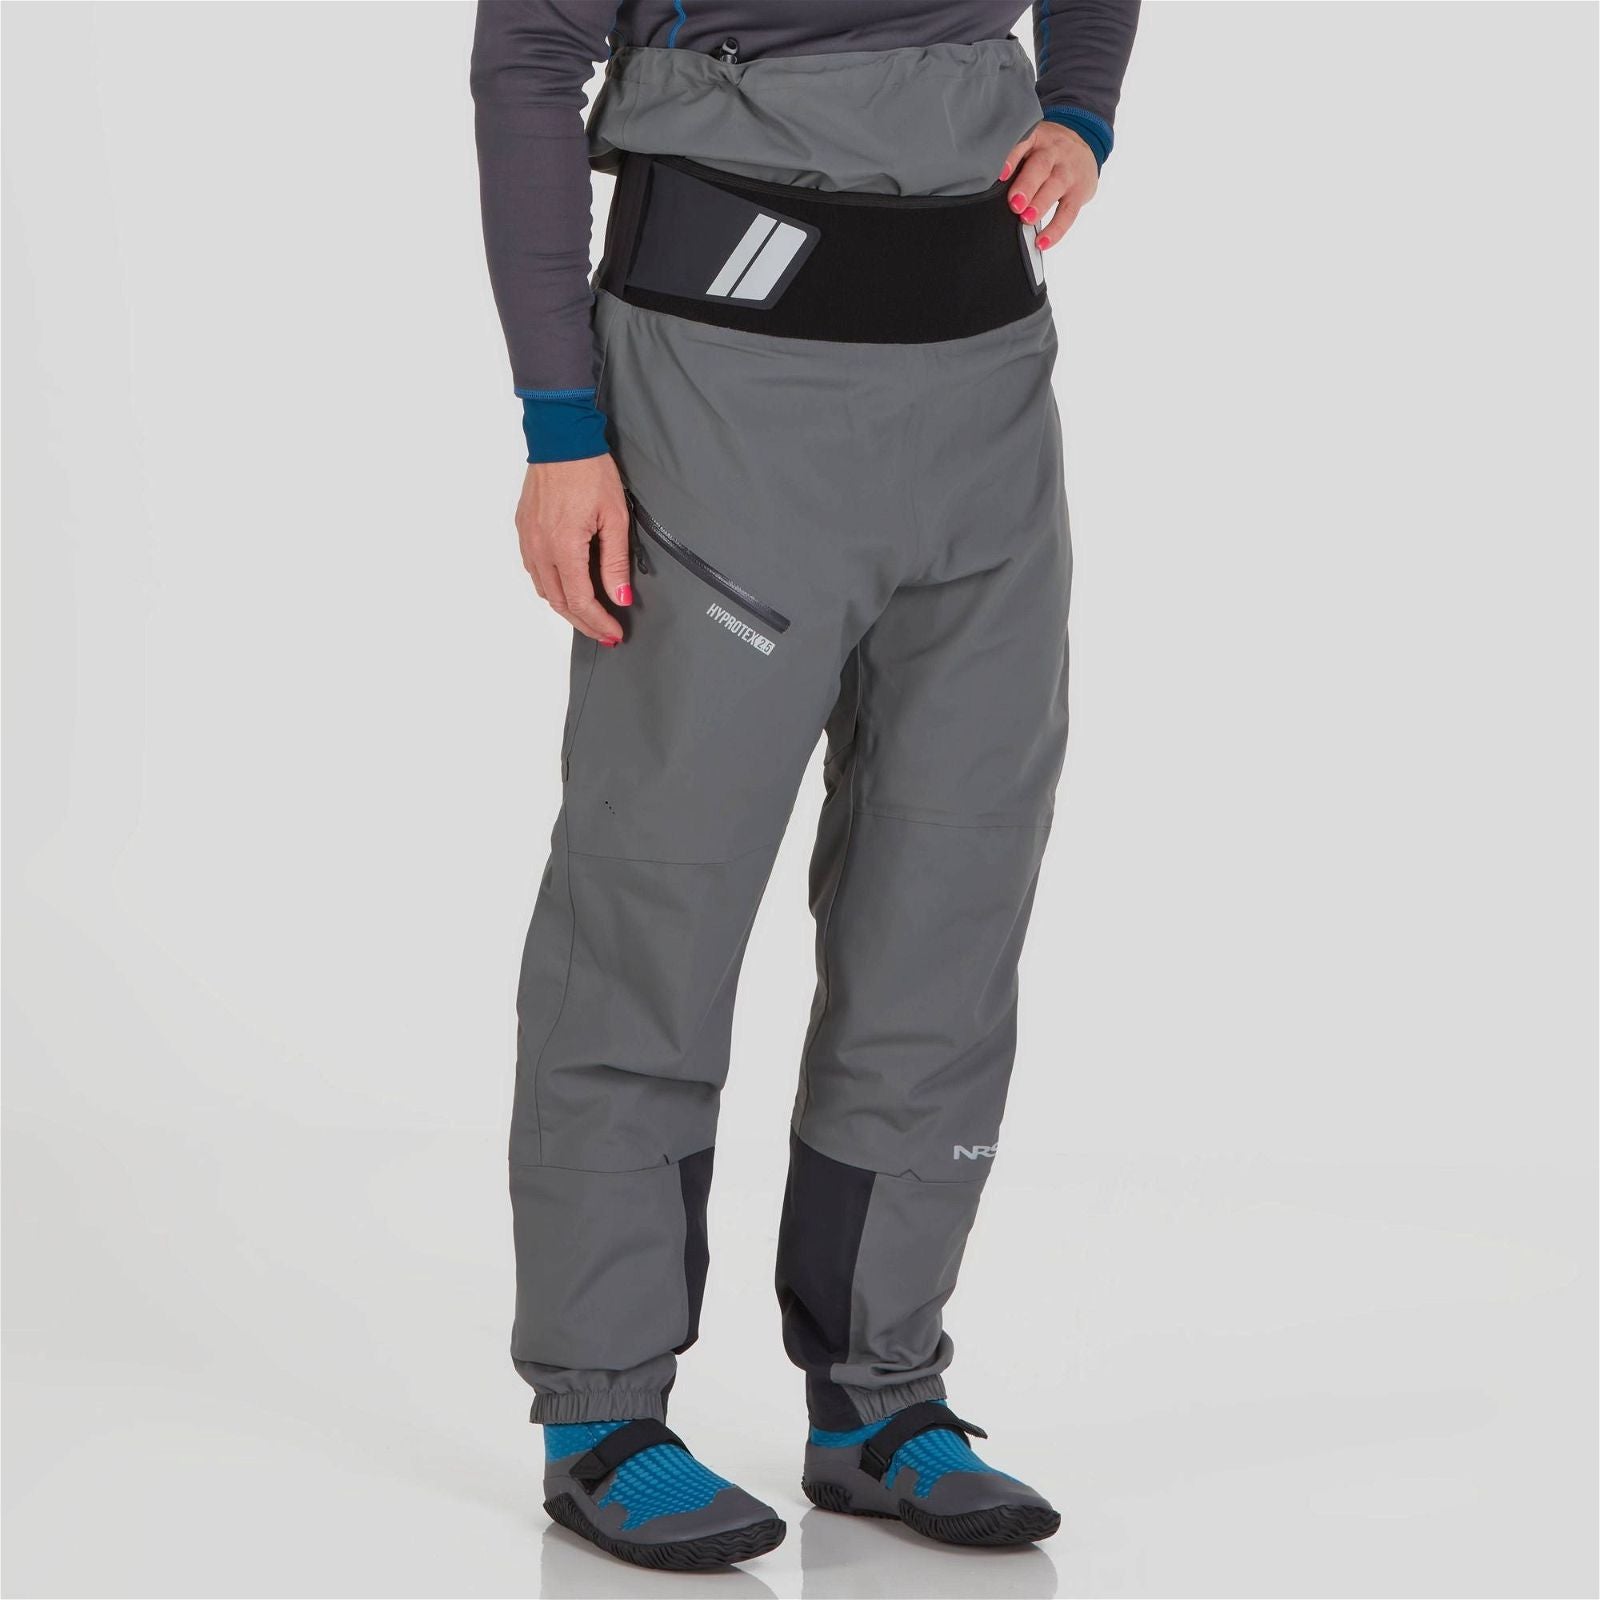   Women's Freefall Dry Pant  BestCoast Outfitters 